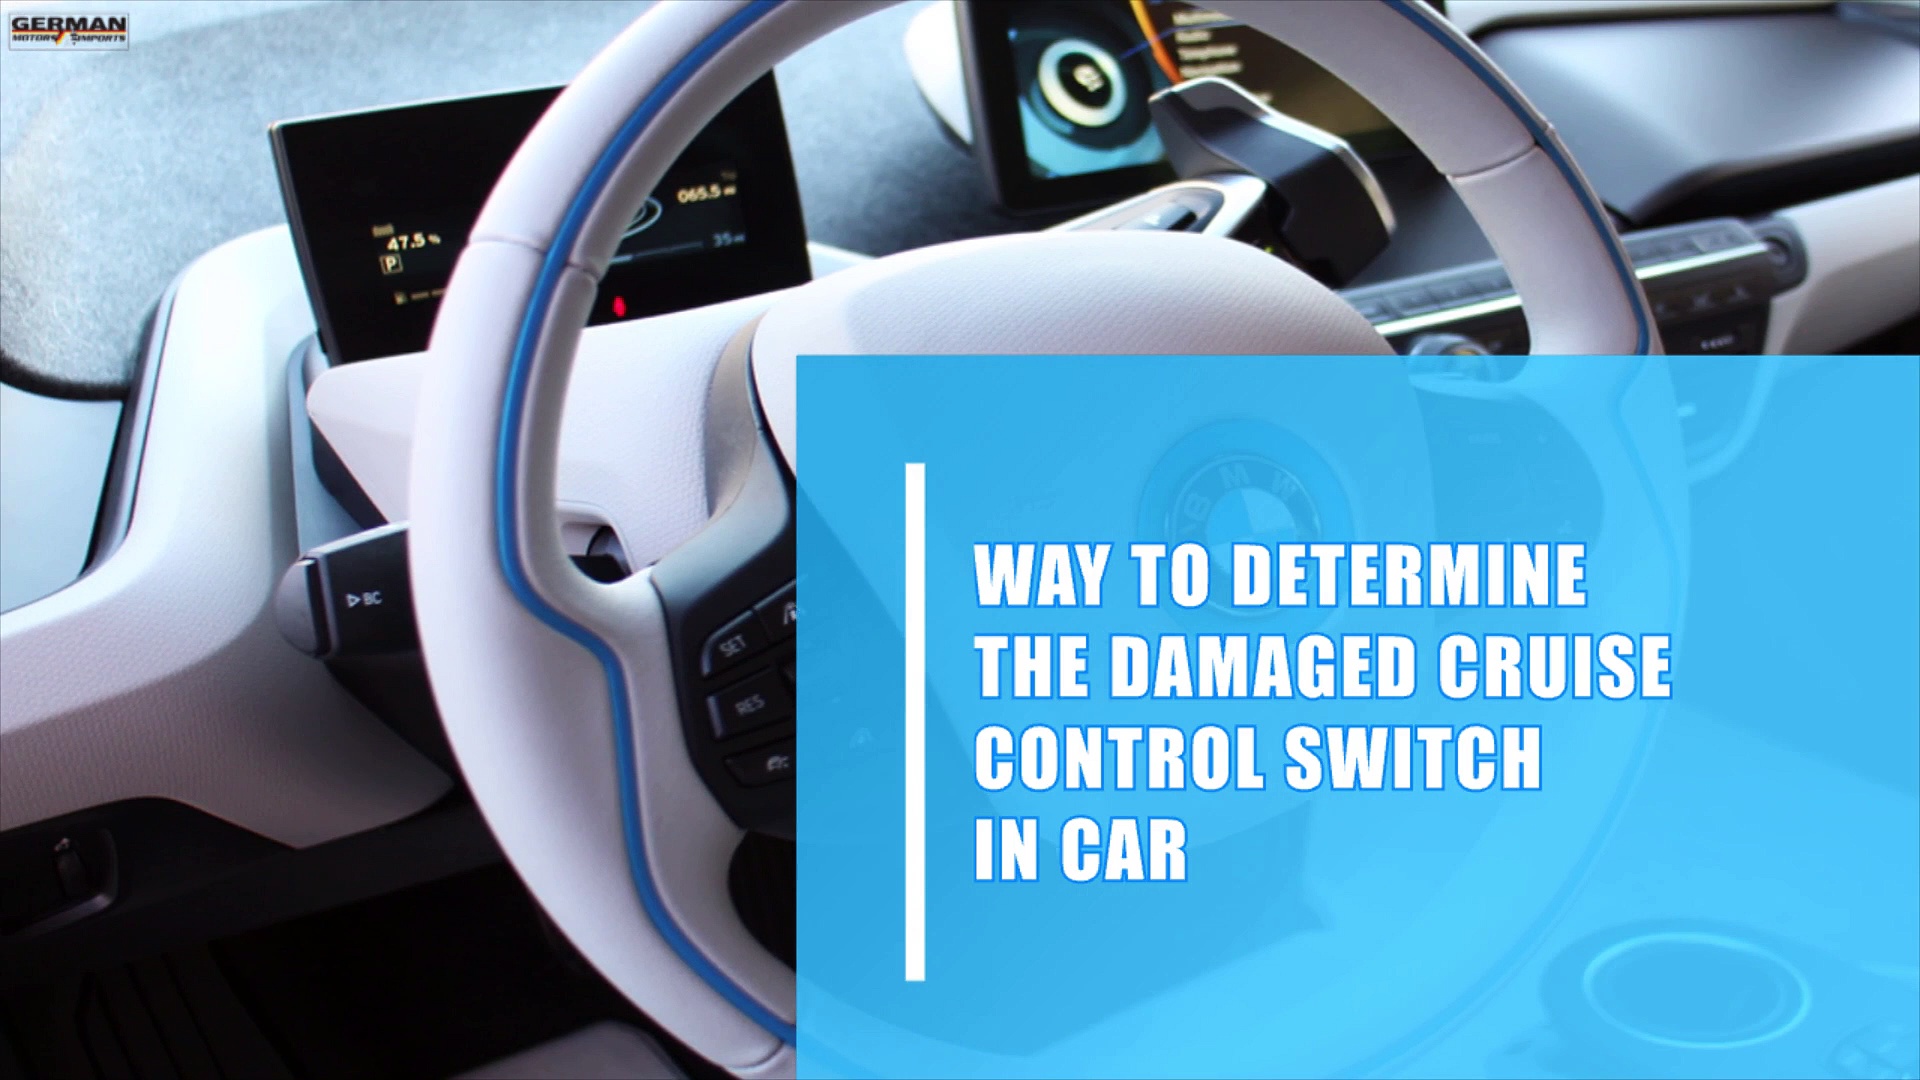 Way to Determine the Damaged Cruise Control Switch in Car